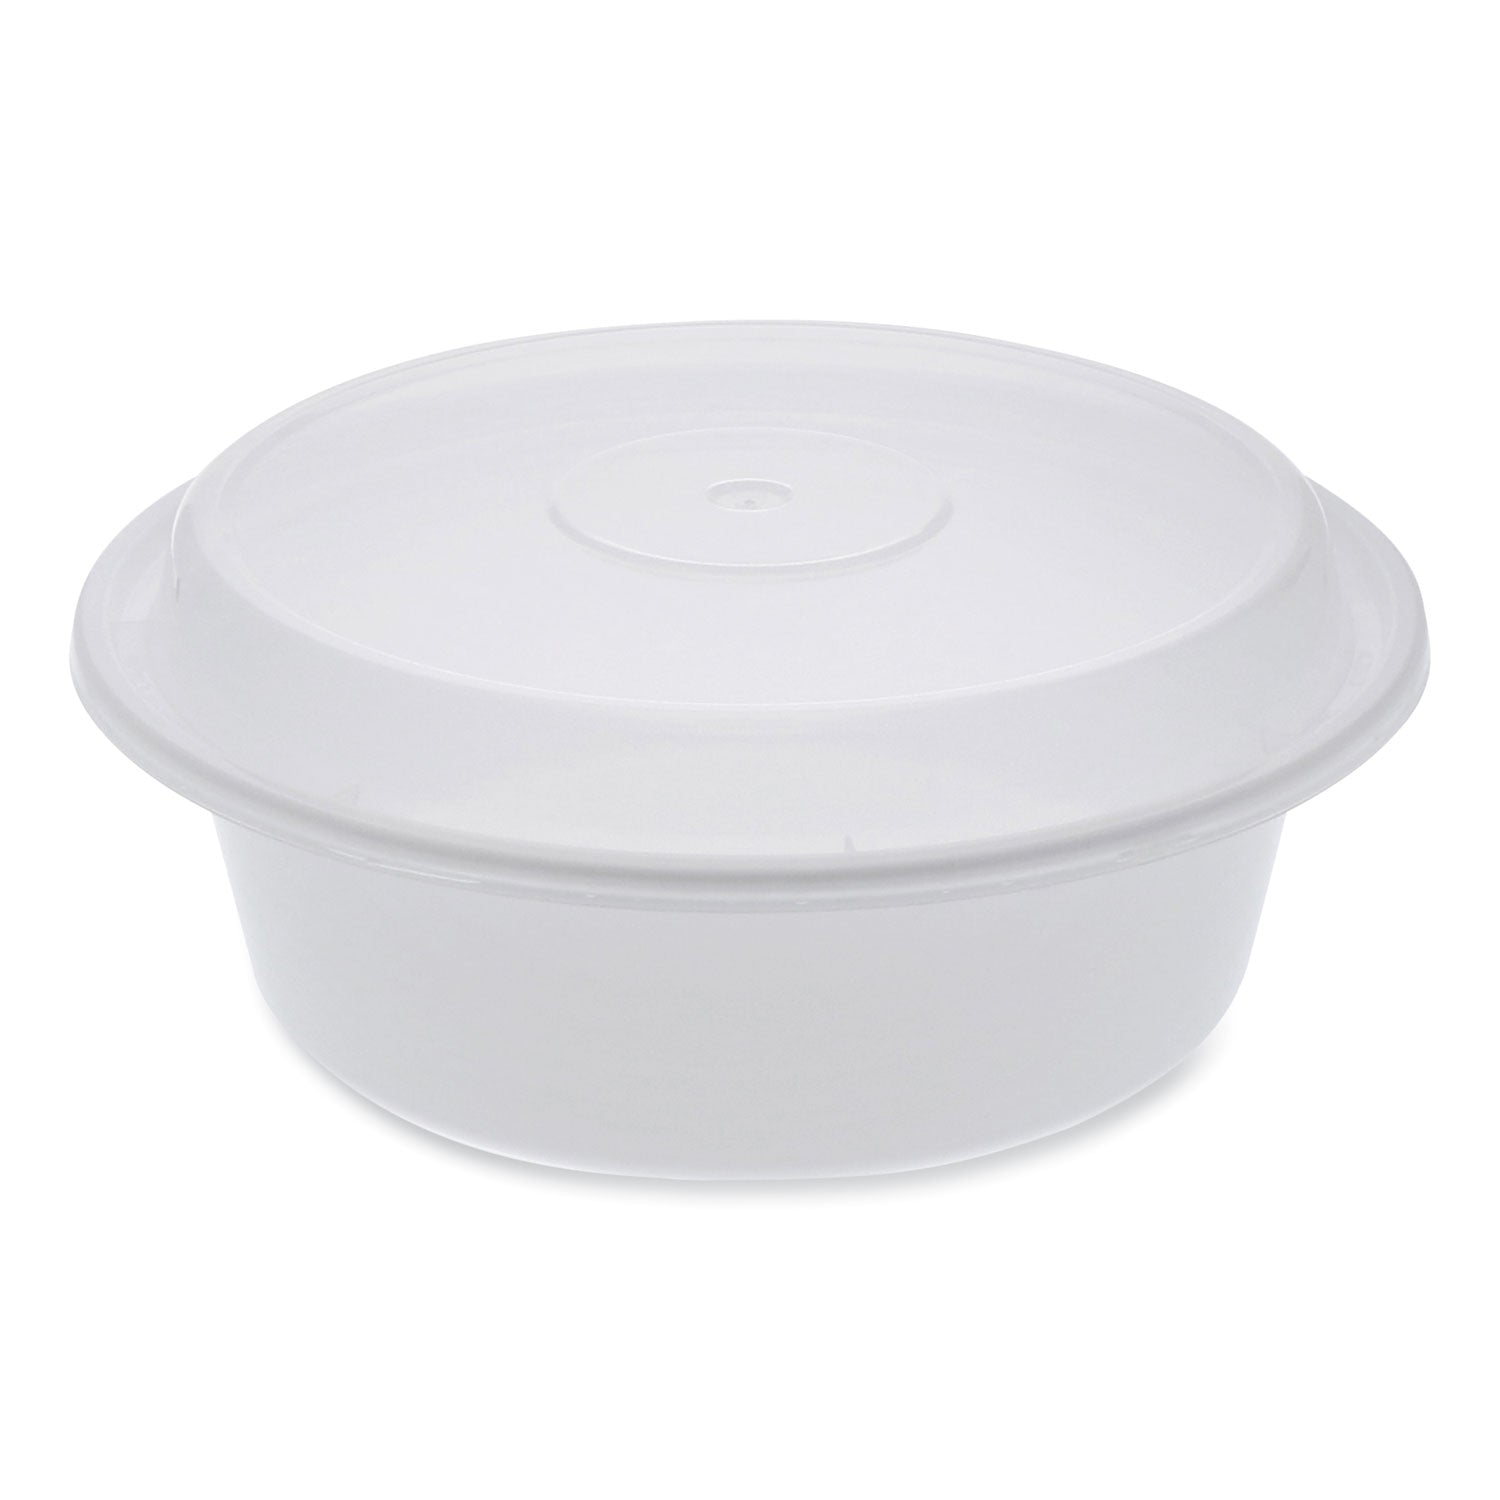 newspring-versatainer-microwavable-containers-round-32-oz-7-x-7-x-275-white-clear-plastic-150-carton_pctnc729 - 1